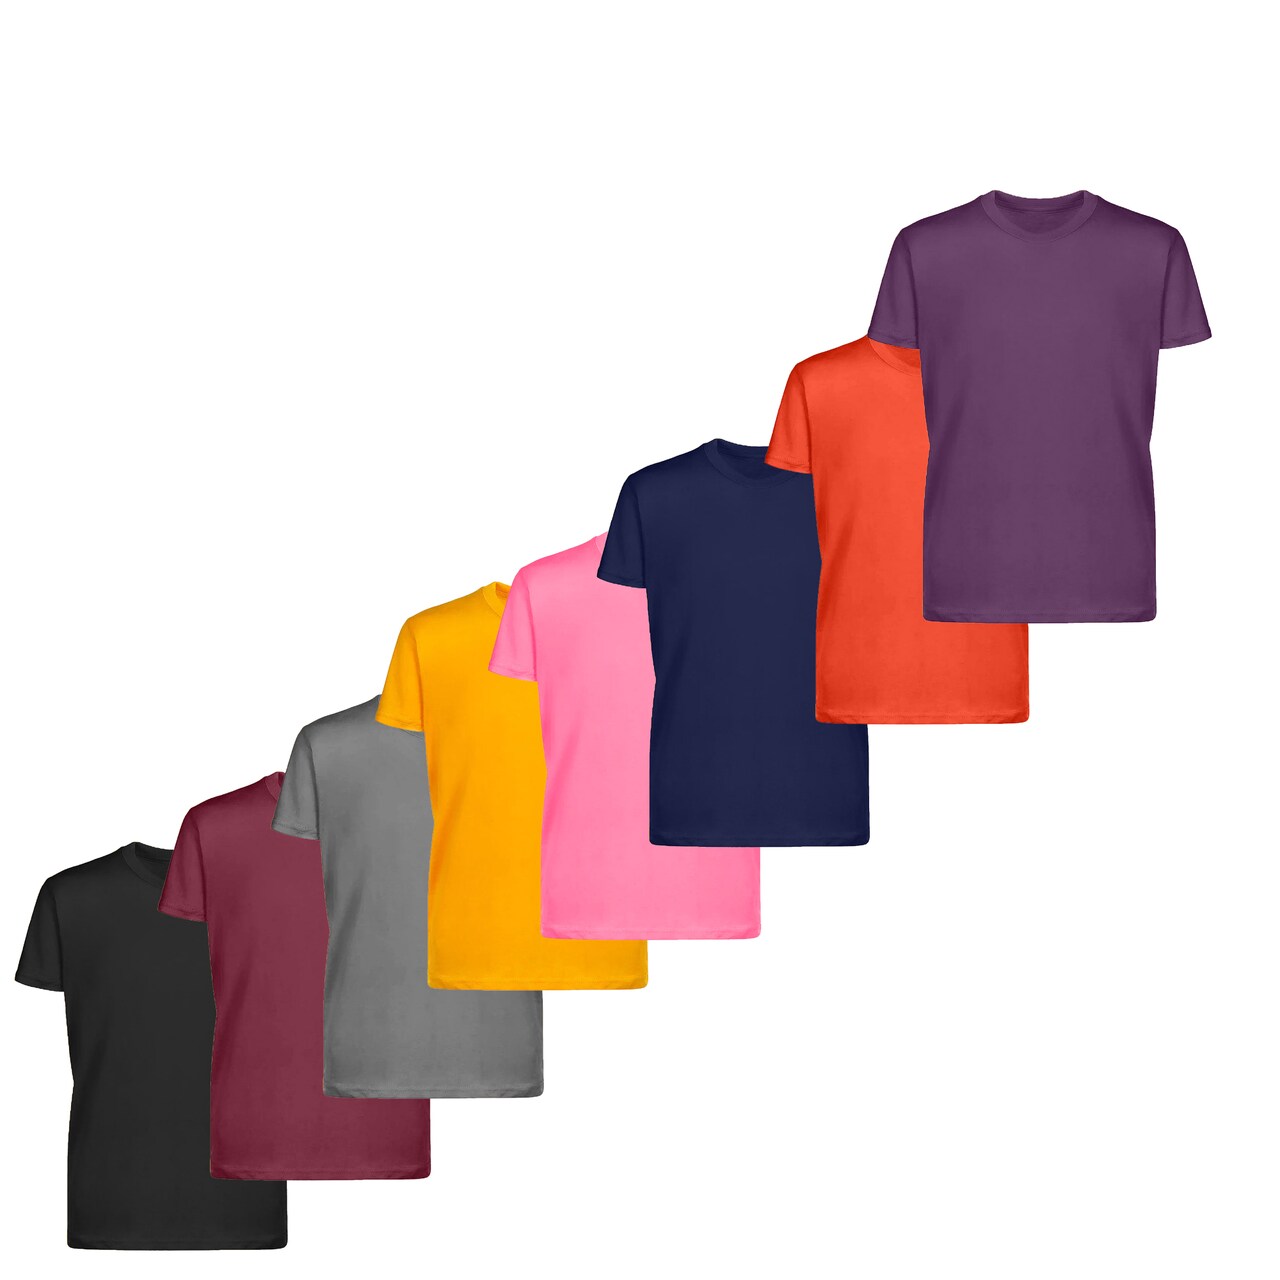 Kids Pack size T-shirts - 100% Cotton Short Sleeve T-shirts, Cool and Cute  T-shirts for Fashion-Forward Kids - Summer Tees, RADYAN®